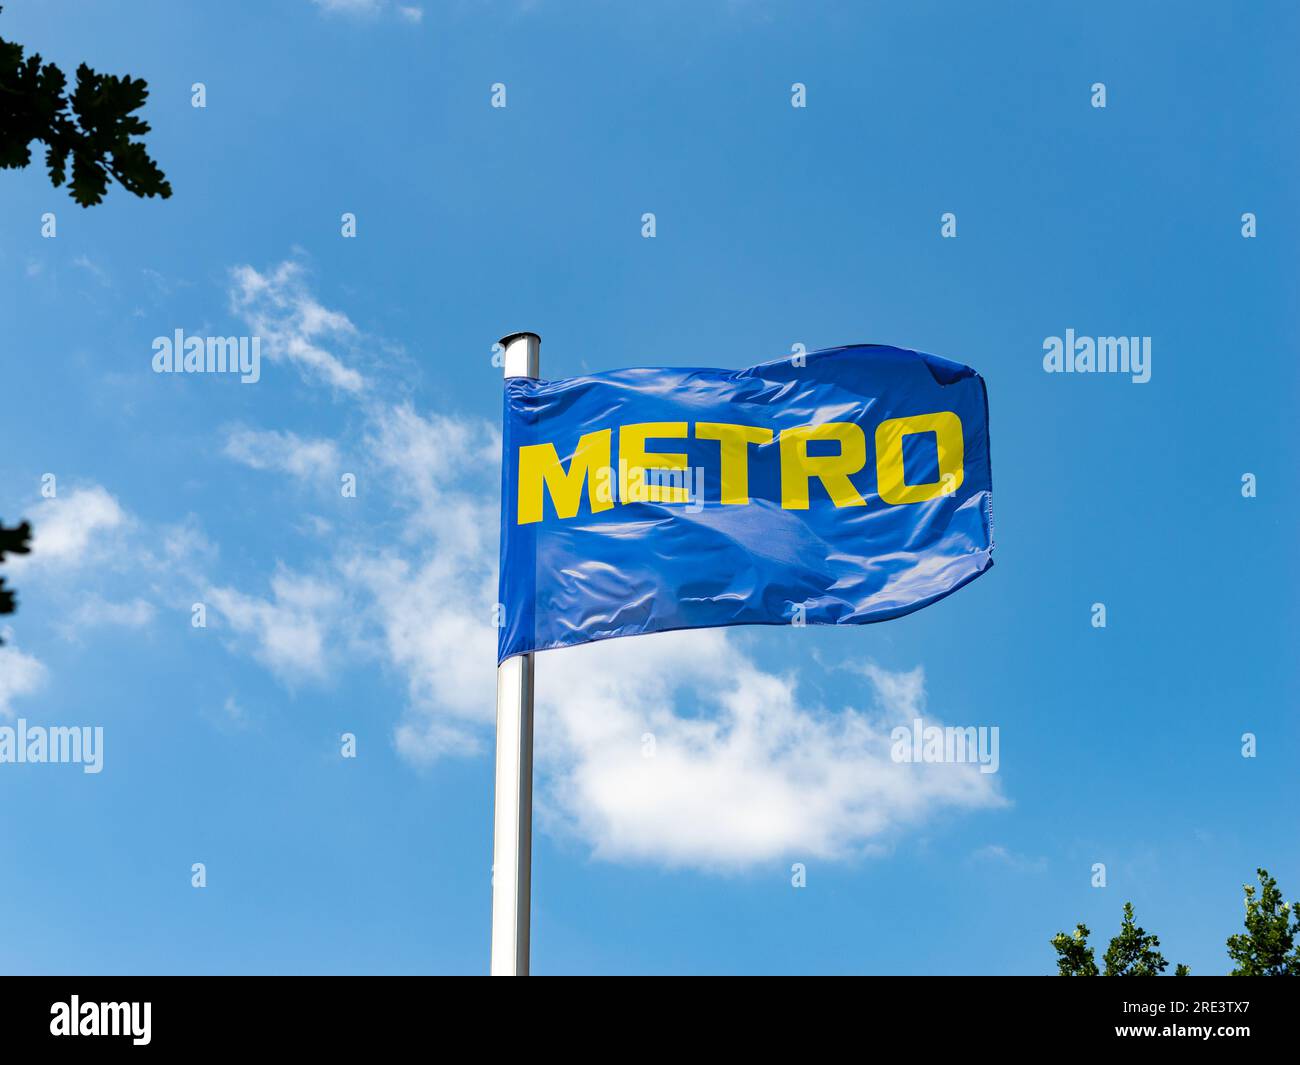 Metro wholesaler company logo sign on a flag high up in the air. The cash and carry store offers products to business members in a b2b context. Stock Photo